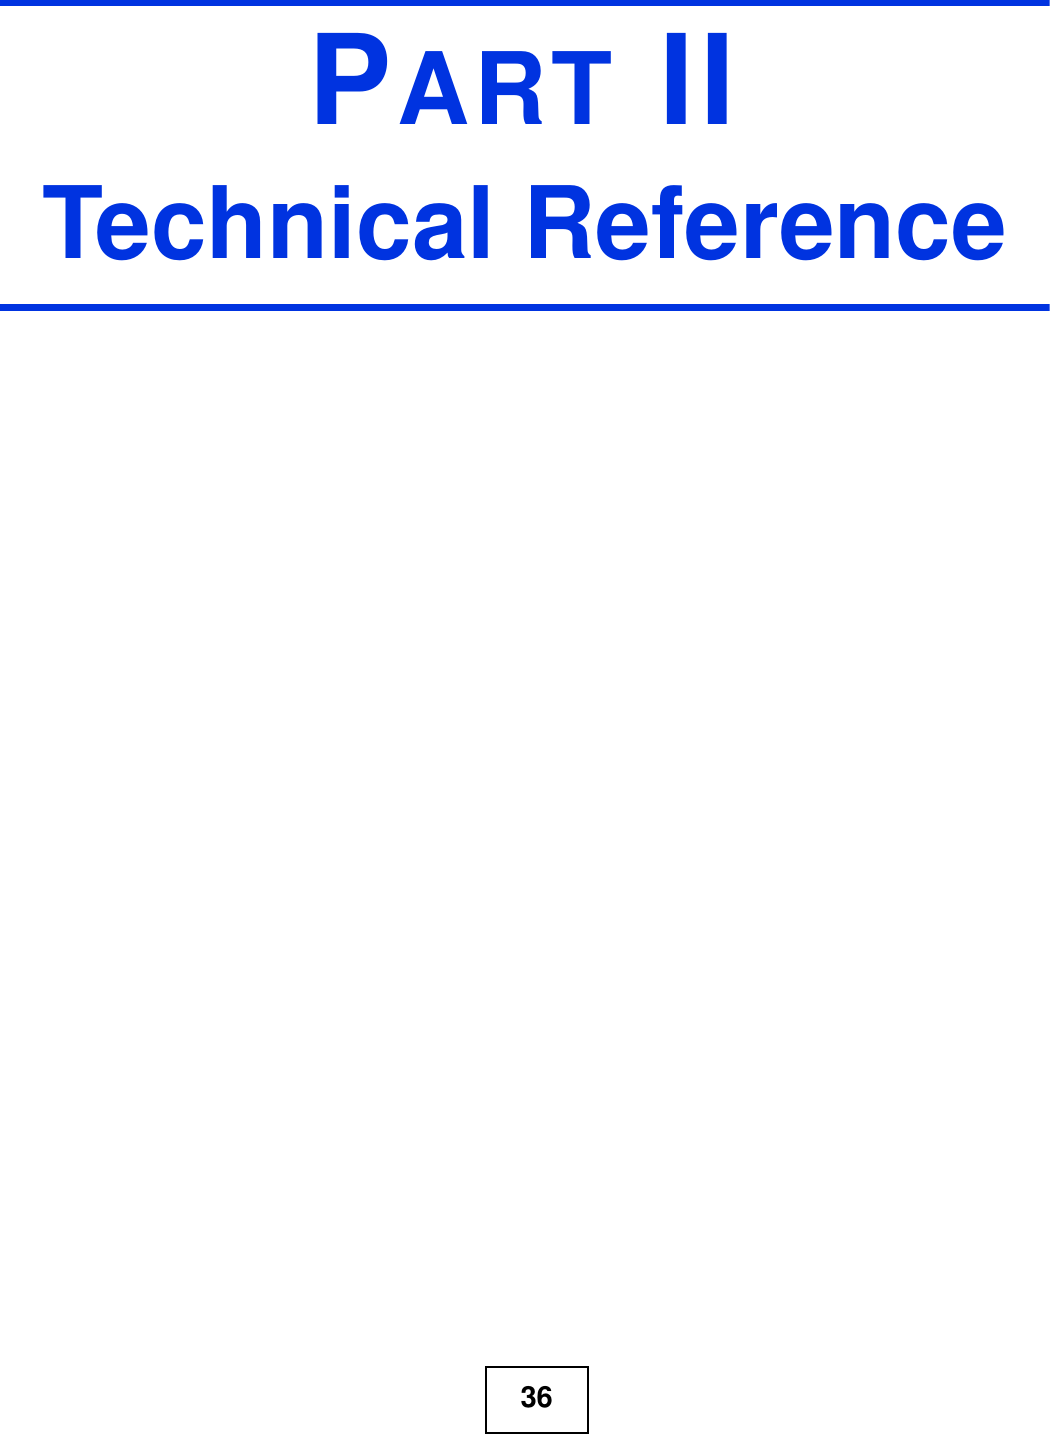 36PART IITechnical Reference